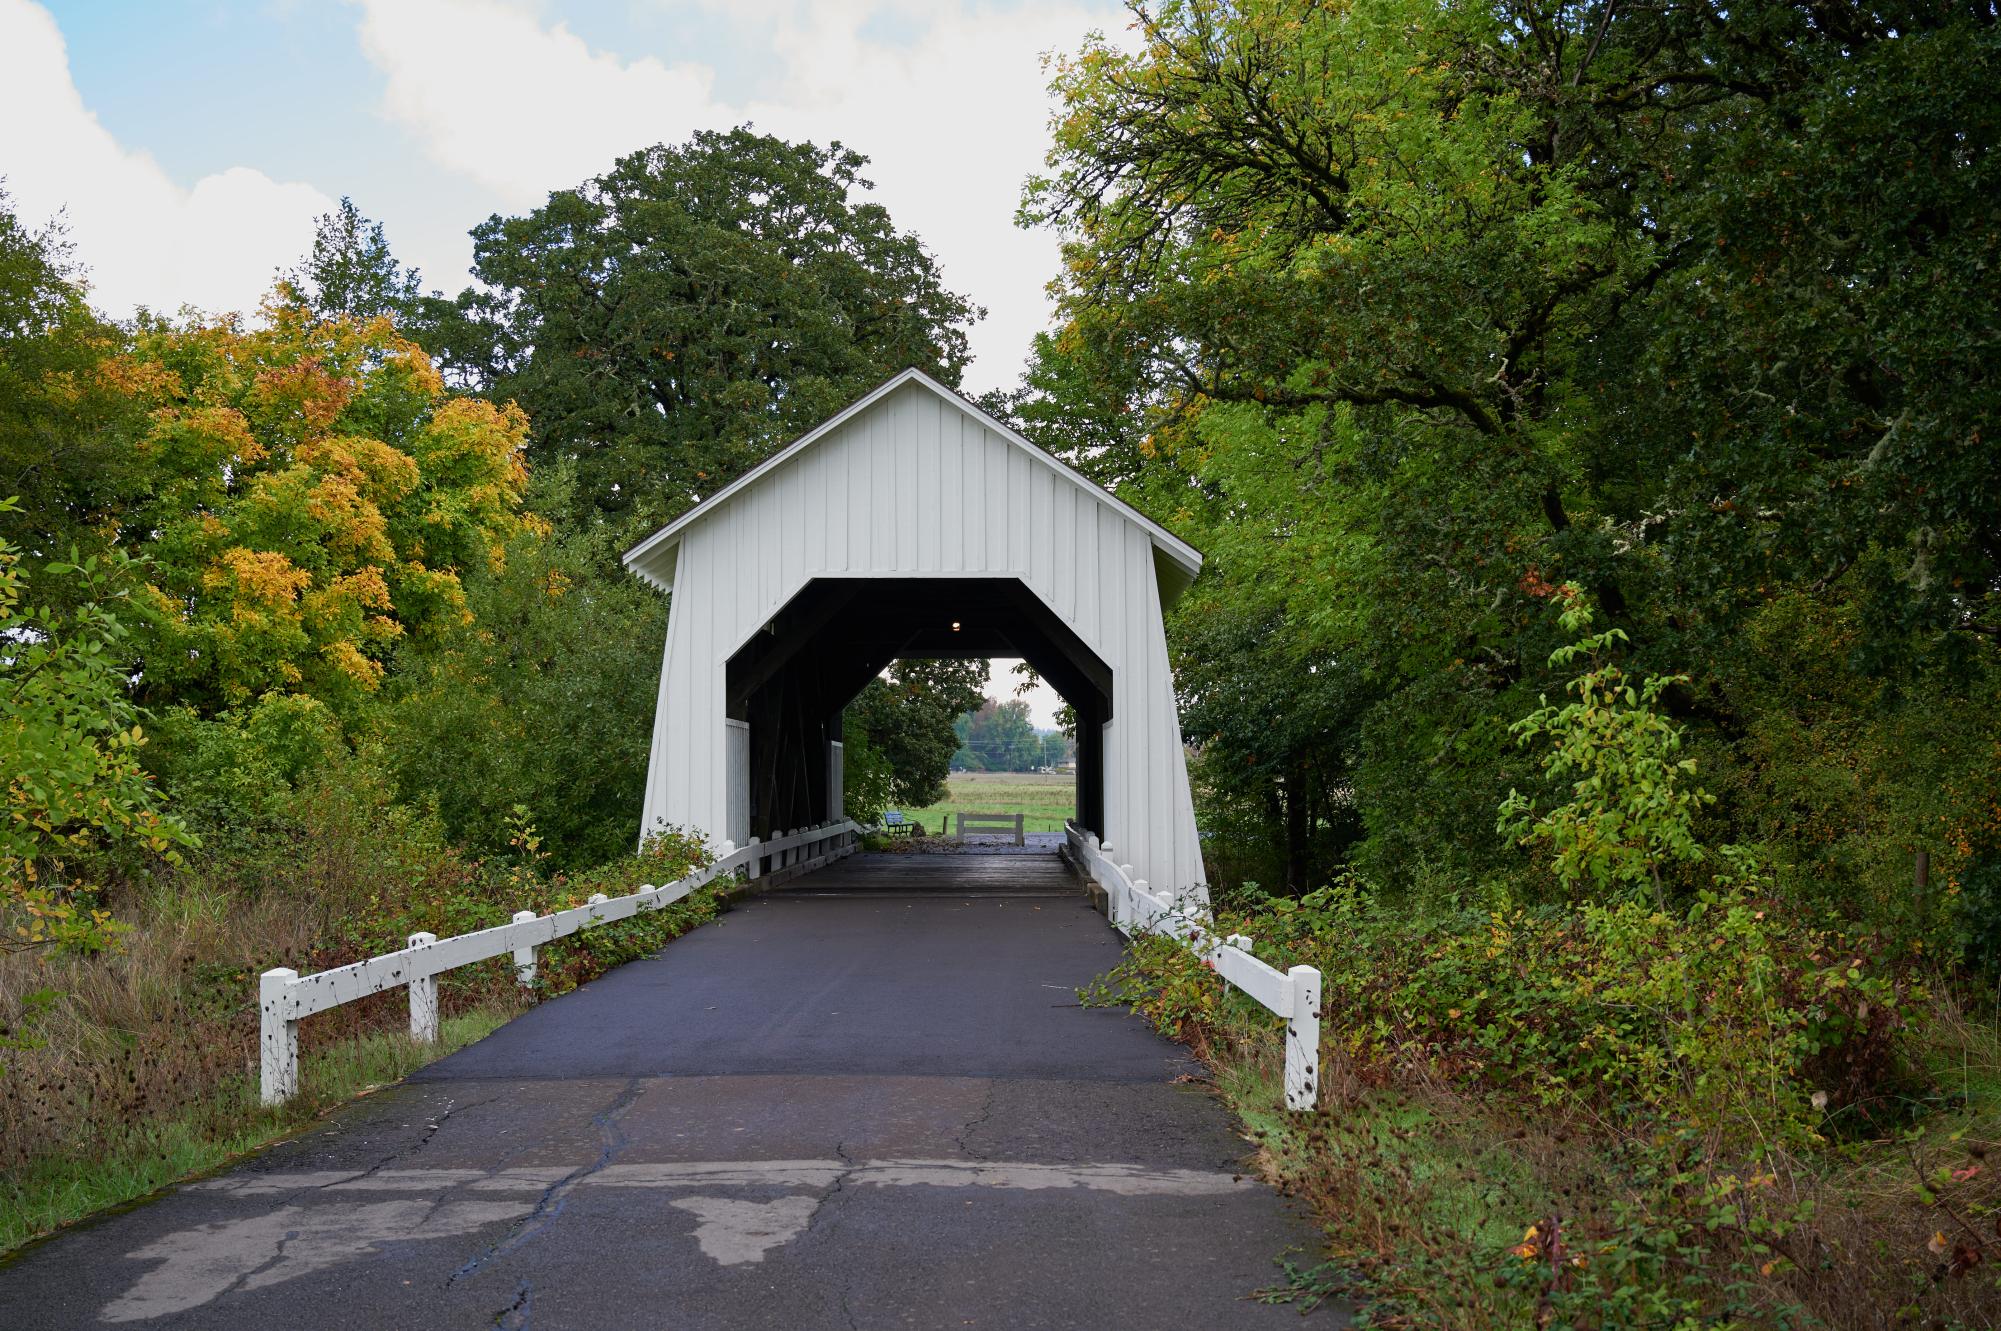 Outside the Oak Creek Covered Bridge, also known as the Irish Bend Covered Bridge, in Corvallis Oregon on Oct.12.